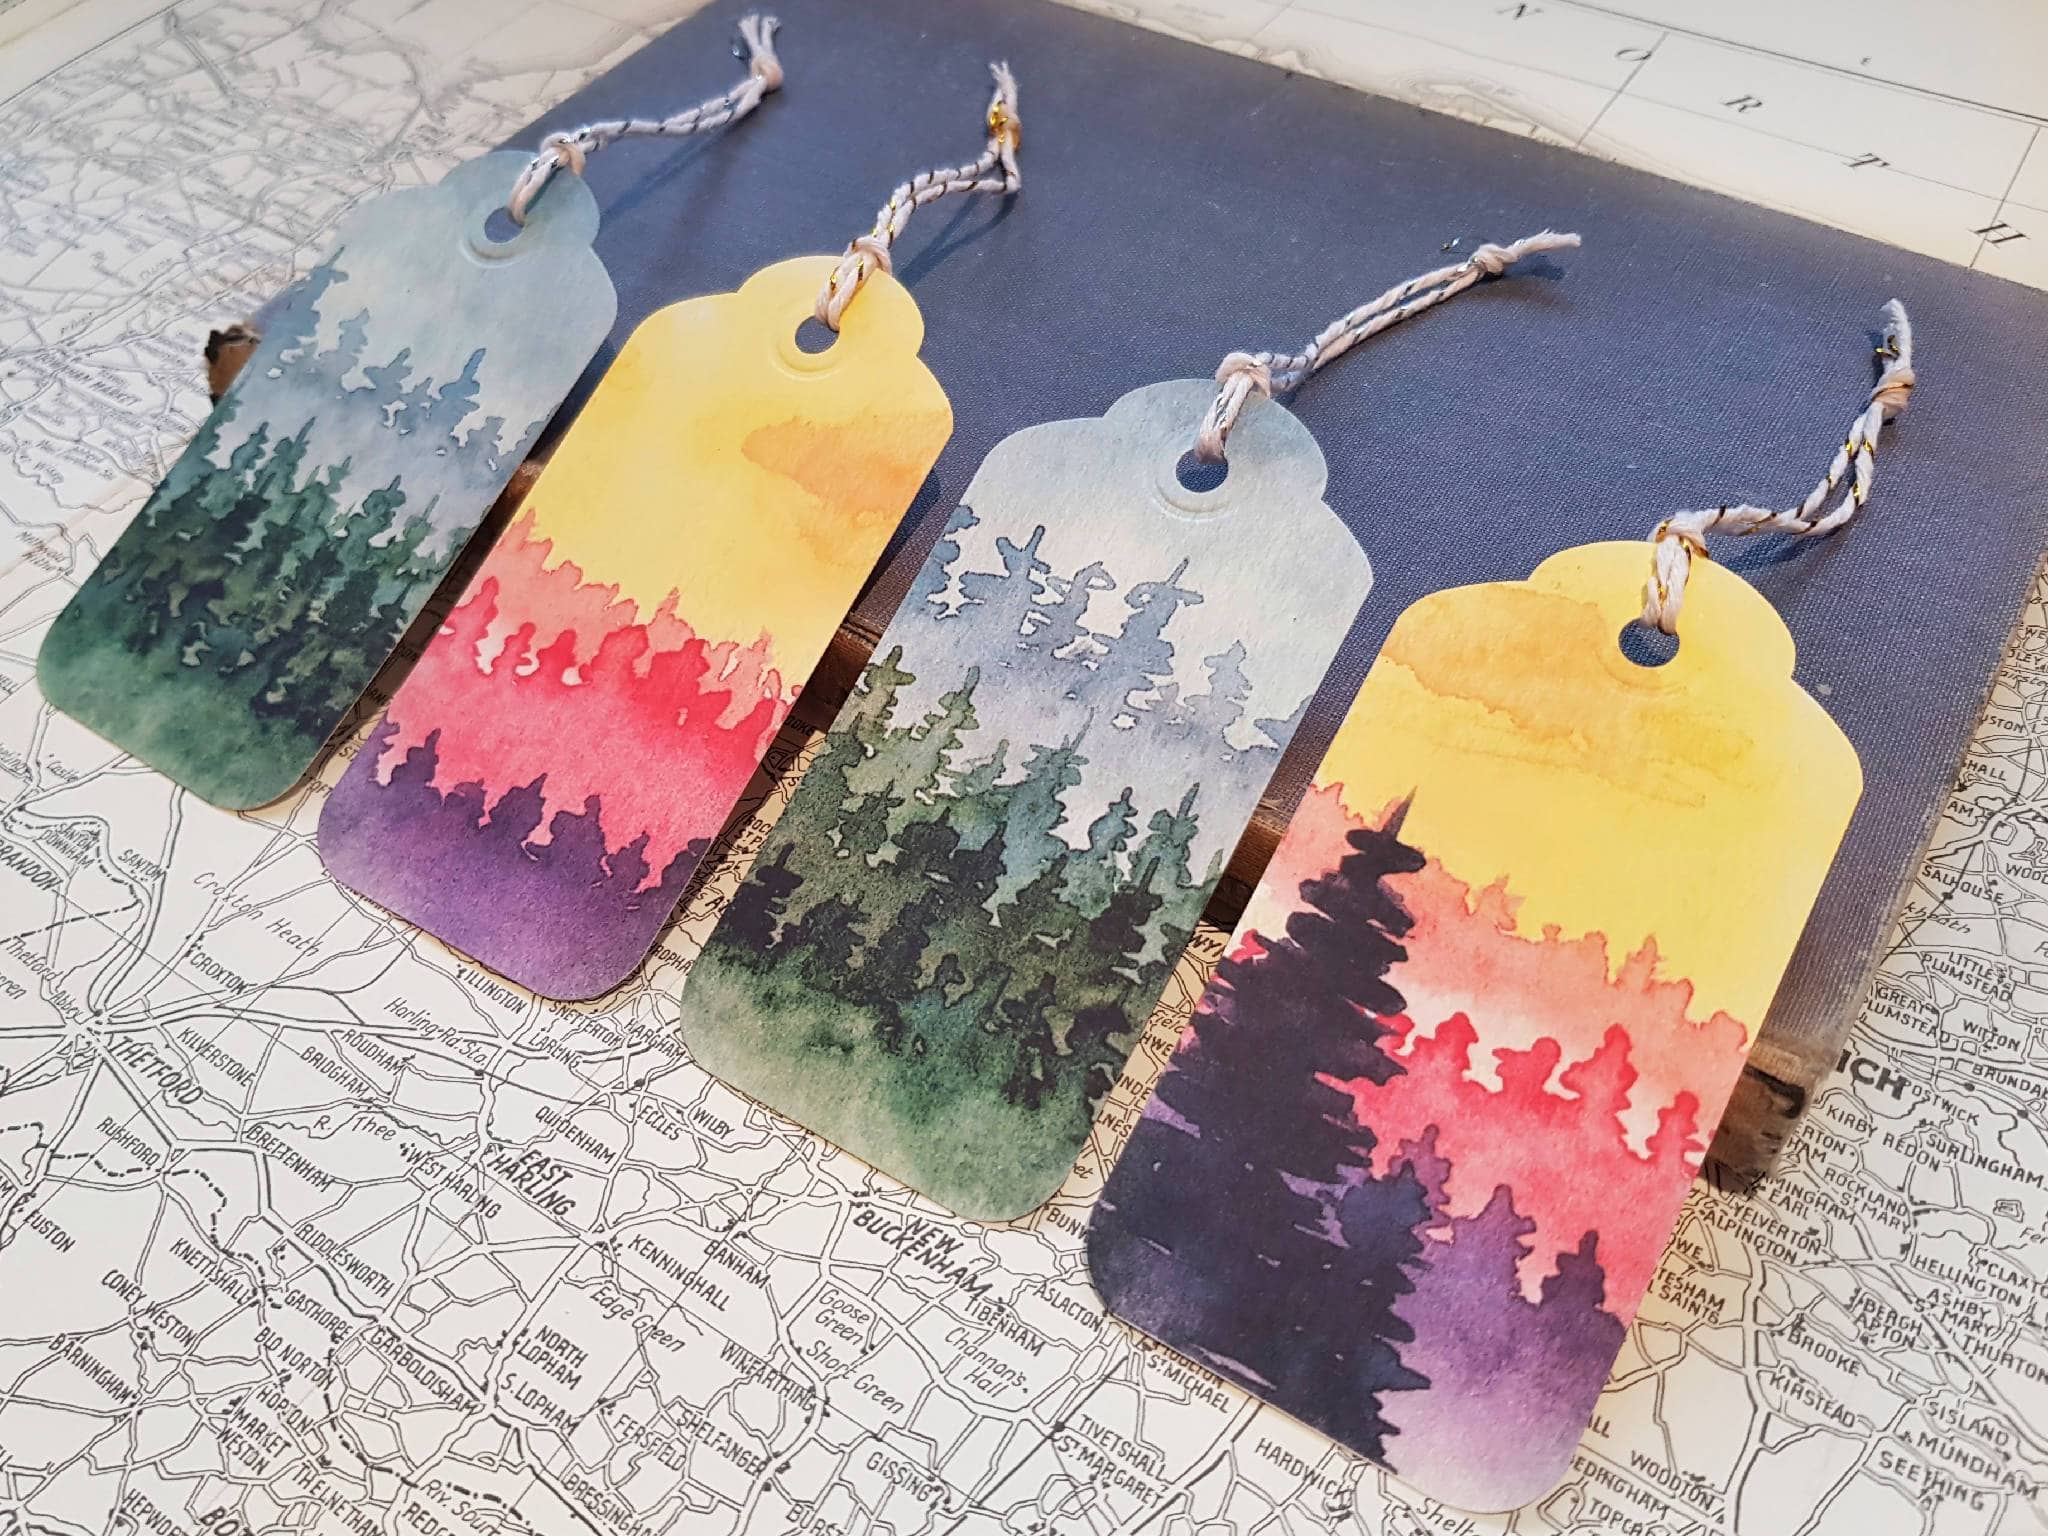 Hand-painted watercolour forest present tags print (set of 4)